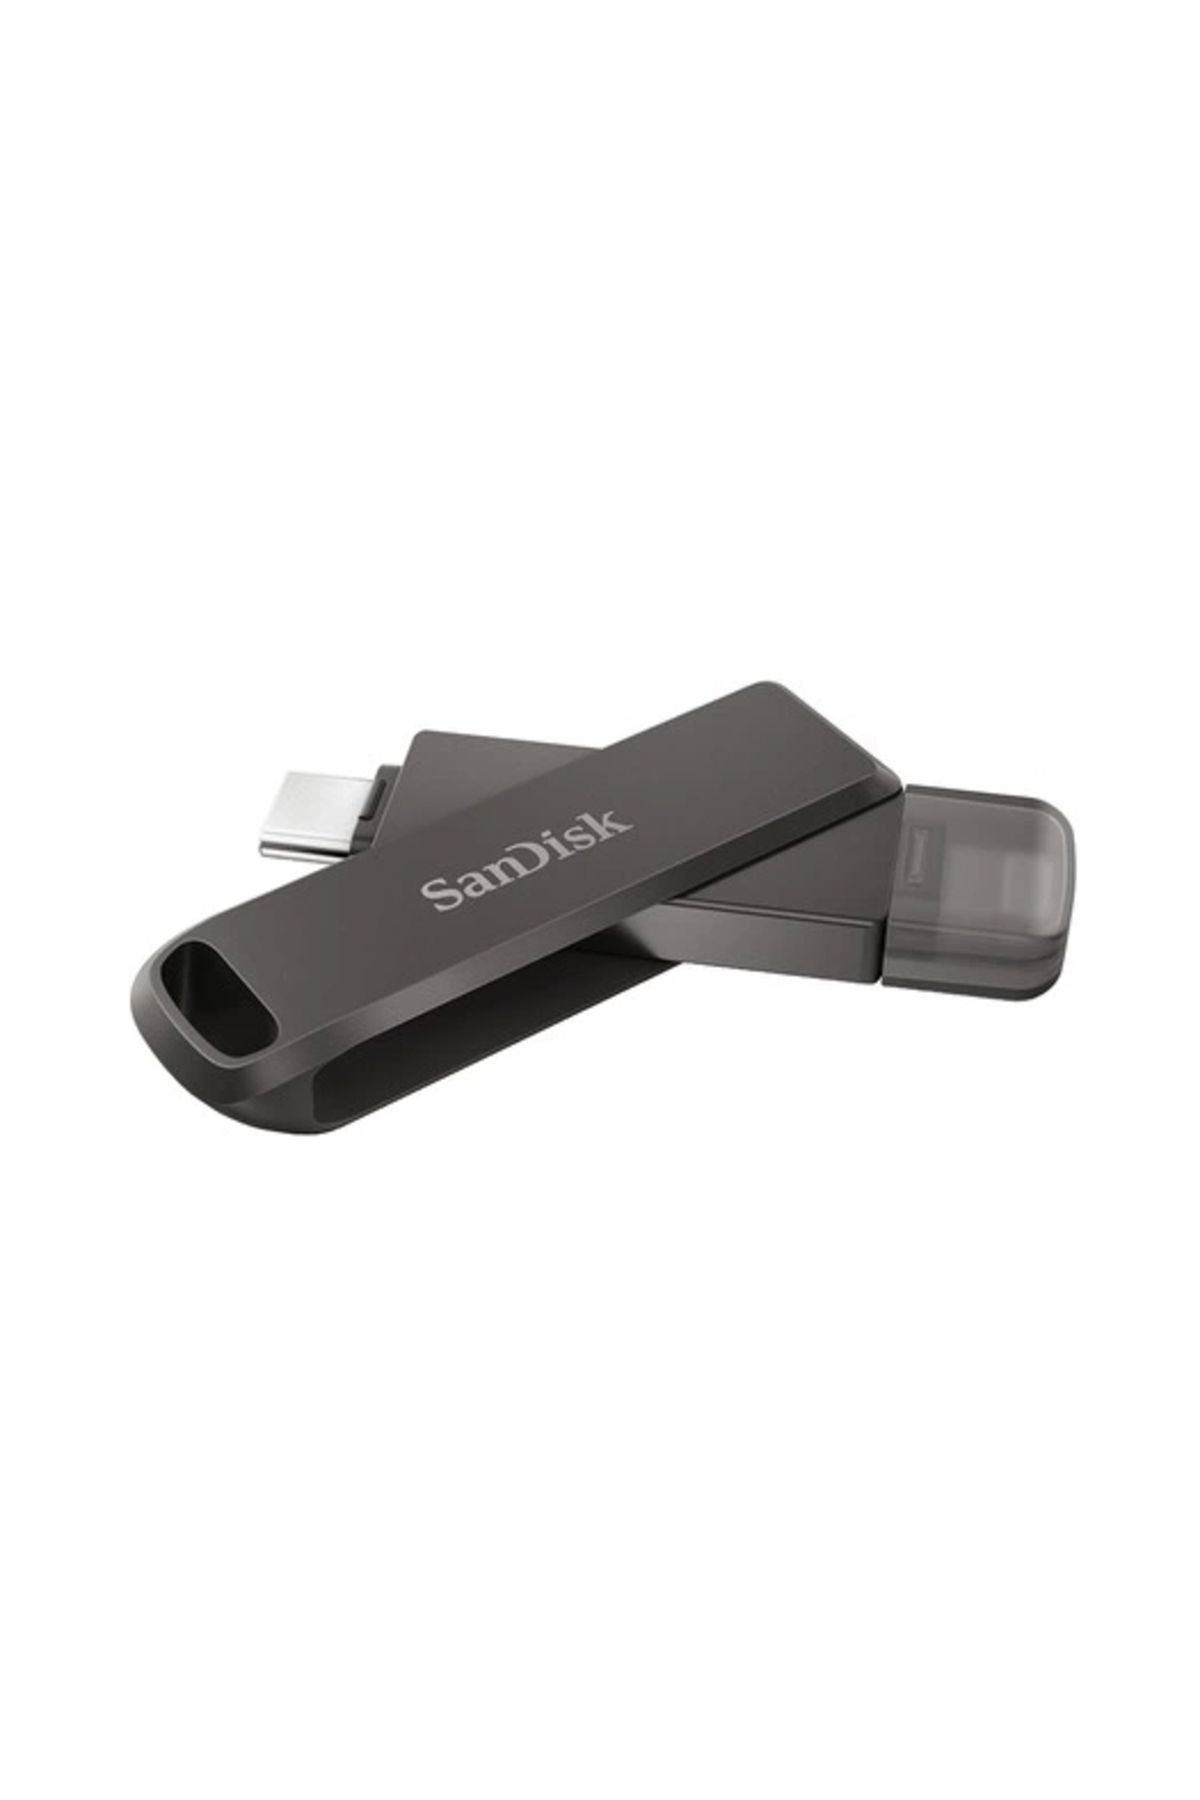 Sandisk iXpand Flash Drive Luxe 128GB - Type-C